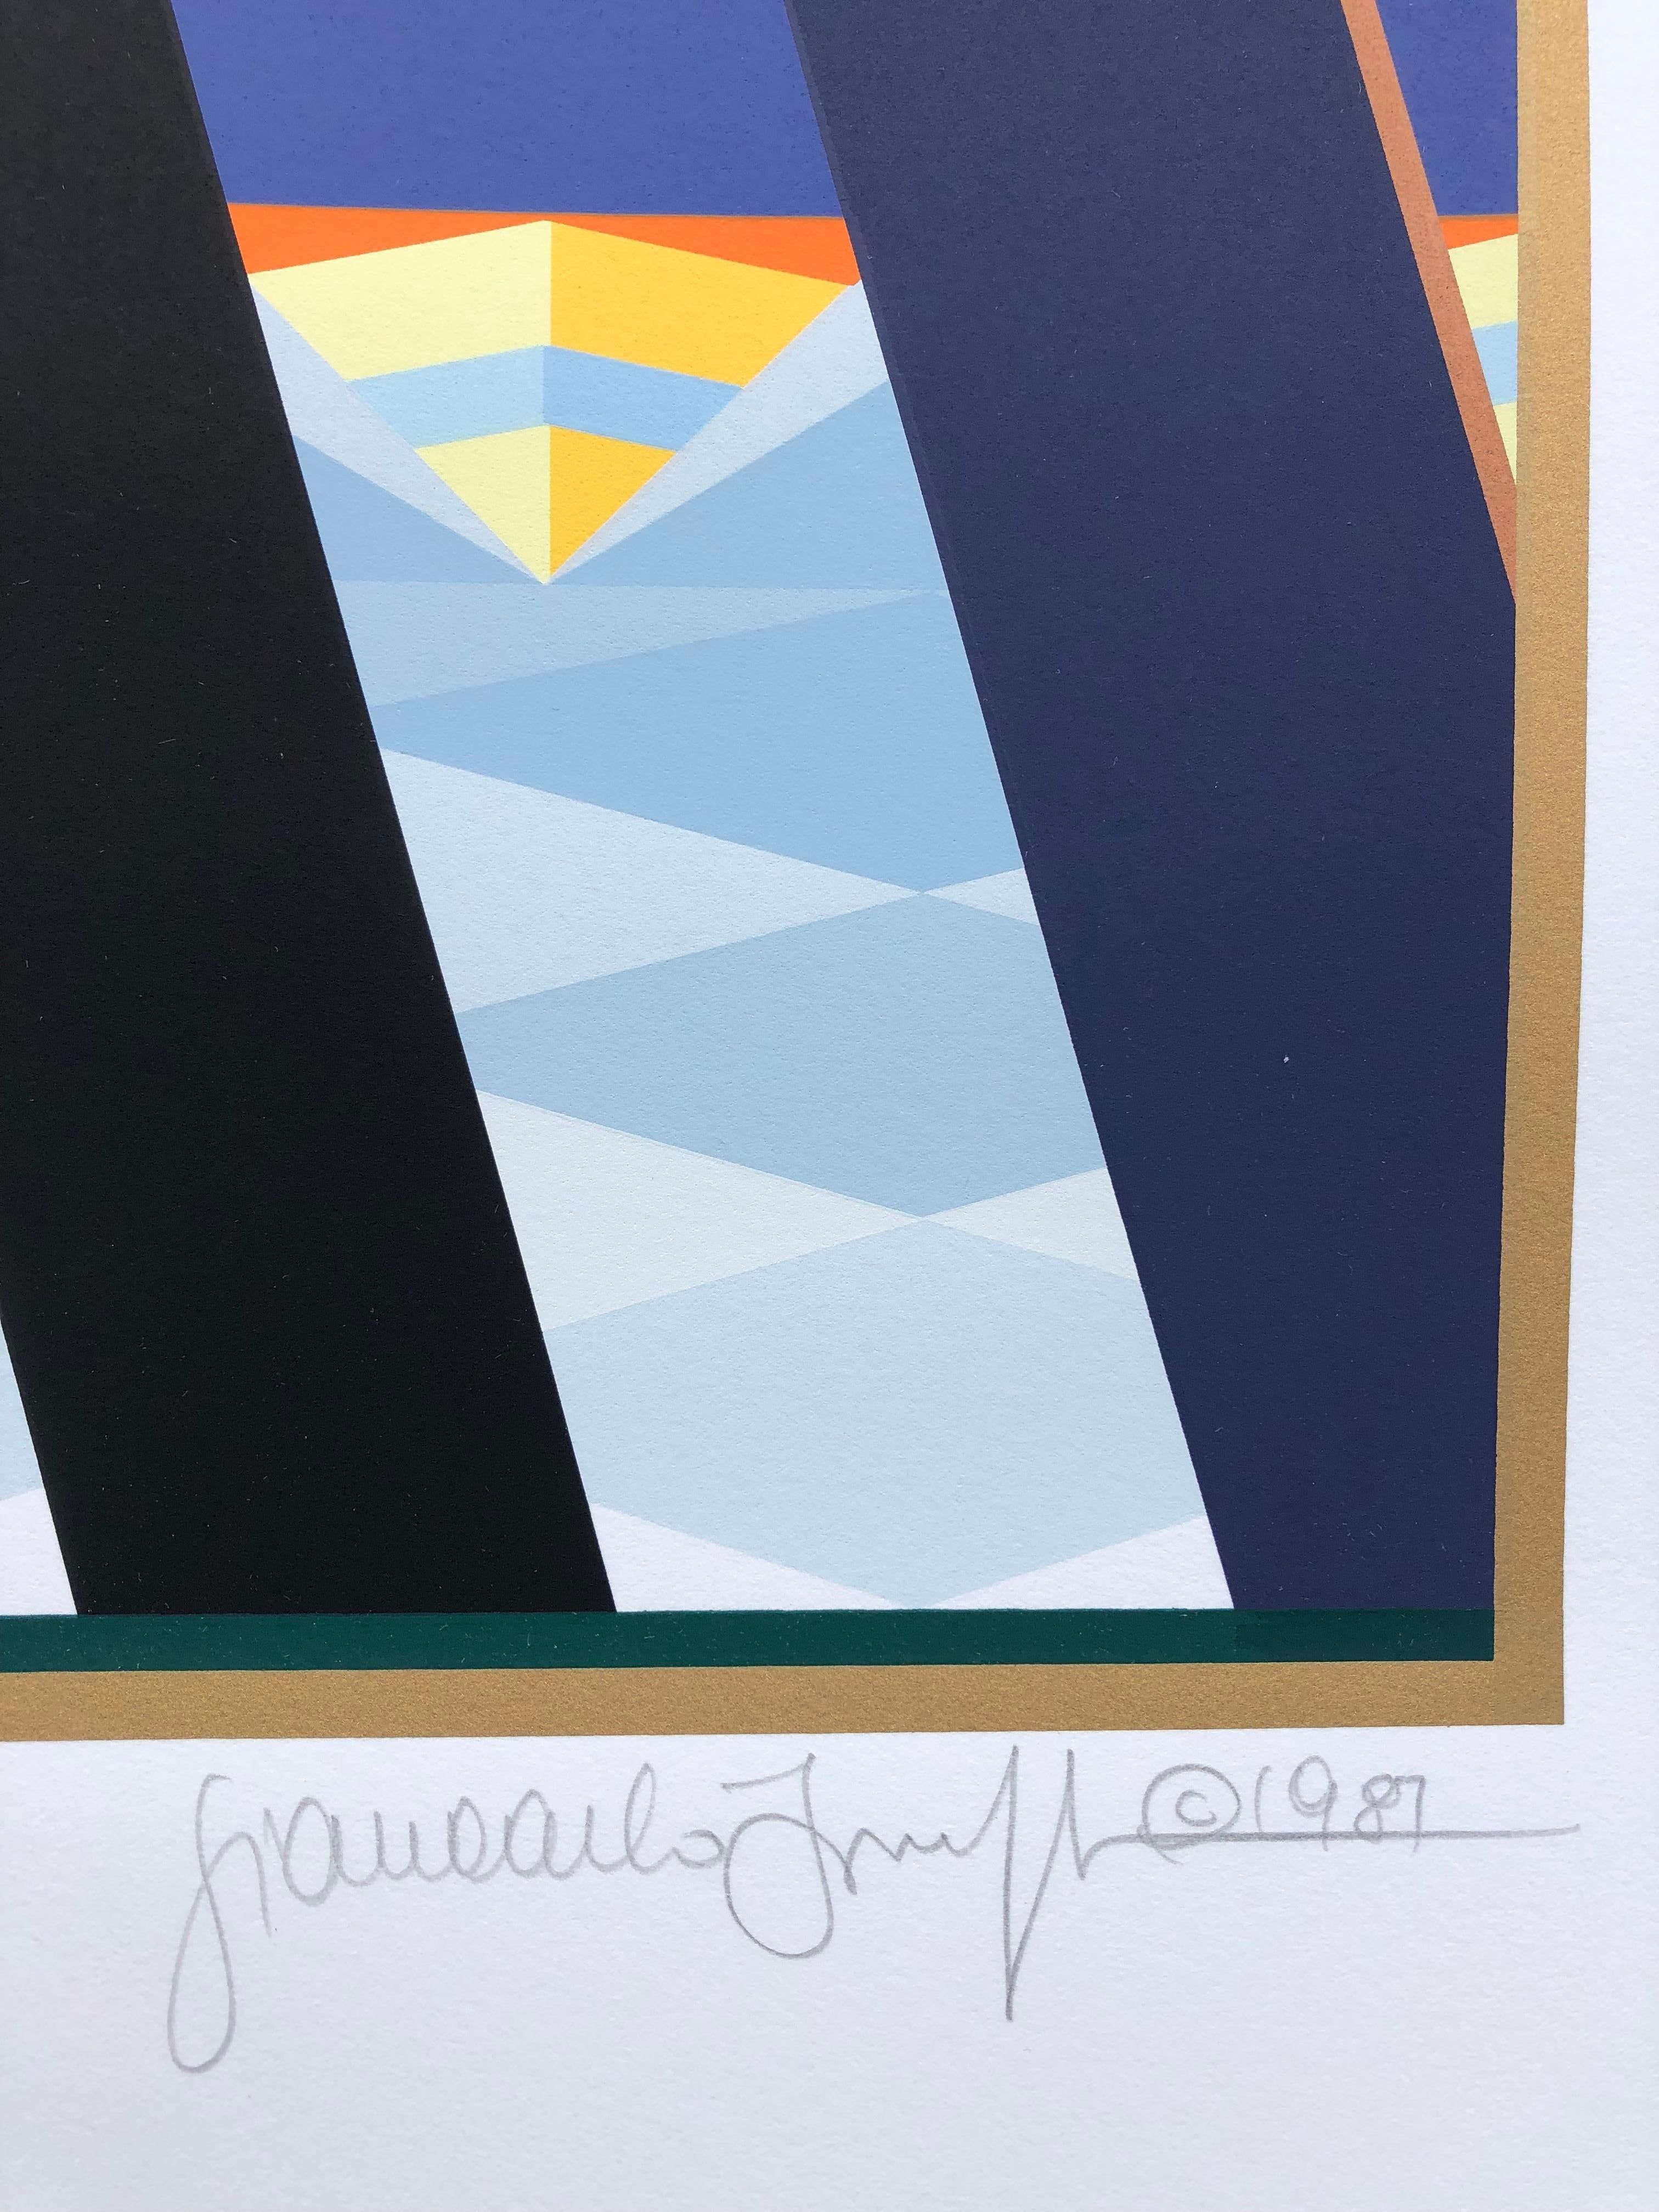 A rare hand-dated and signed serigraph by world-renowned Giancarlo Impiglia. Part of his famous 